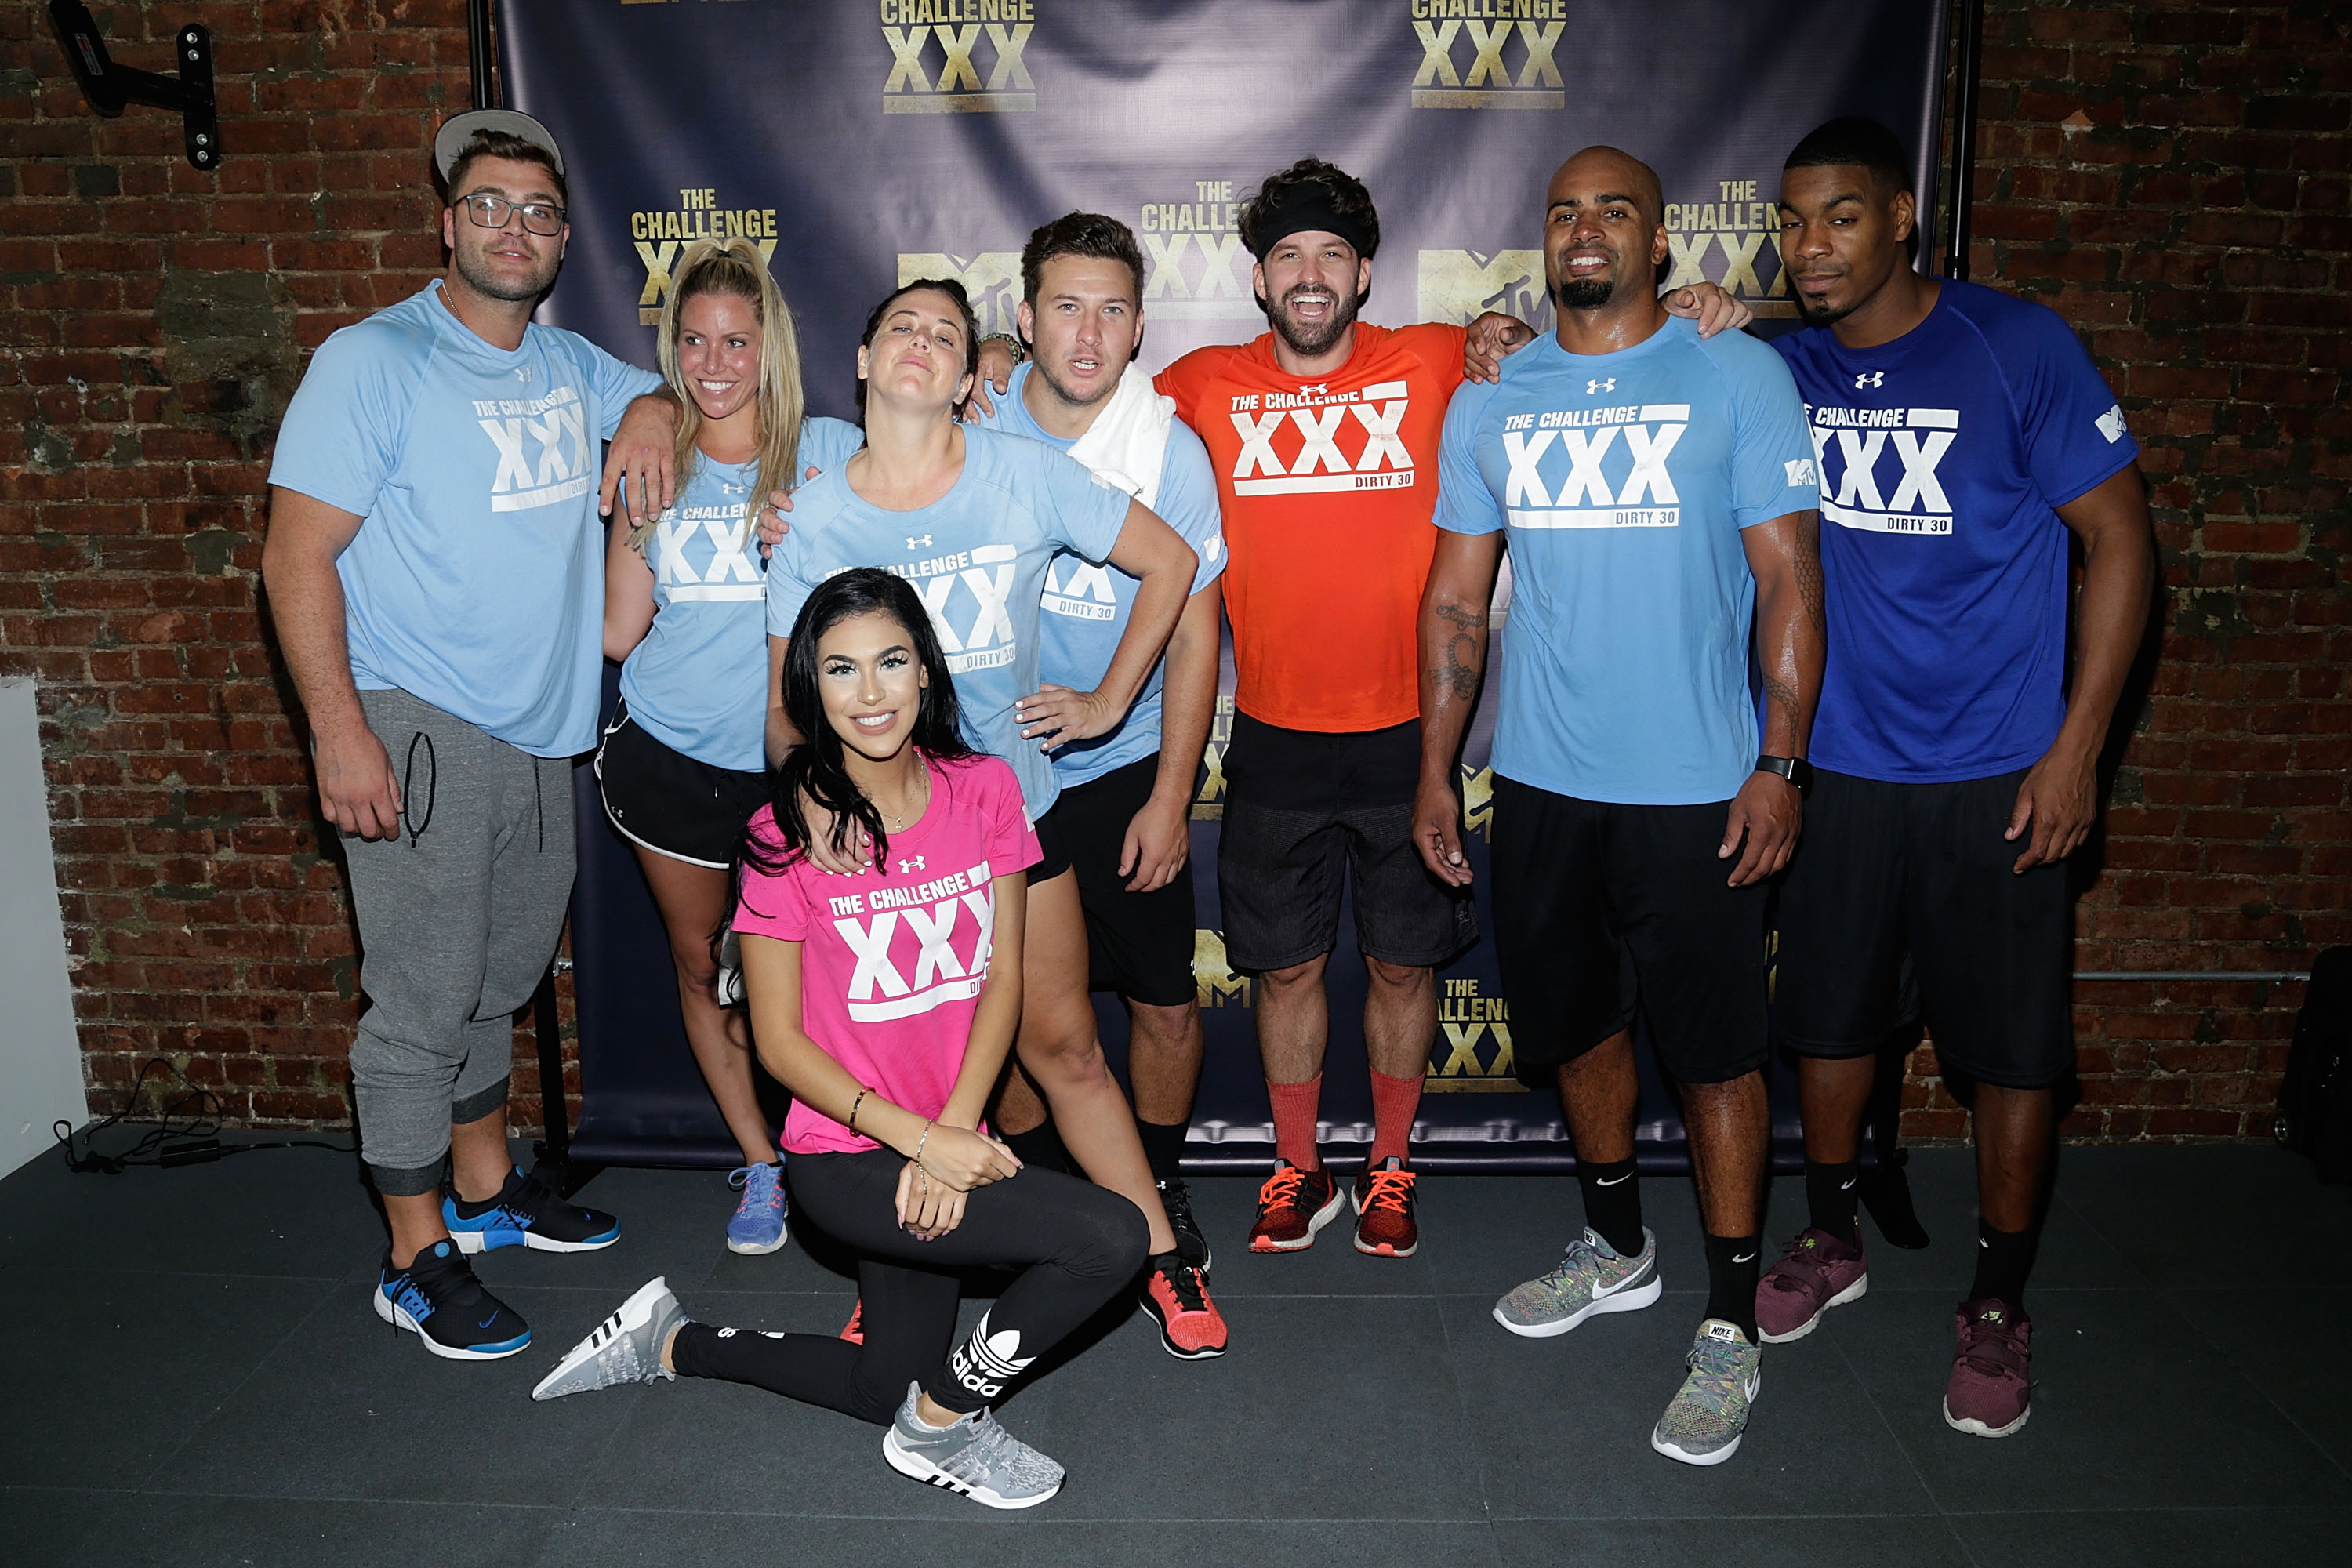 Cast members of The Challenge at the  XXX: Ultimate Fan Experience in July 2017